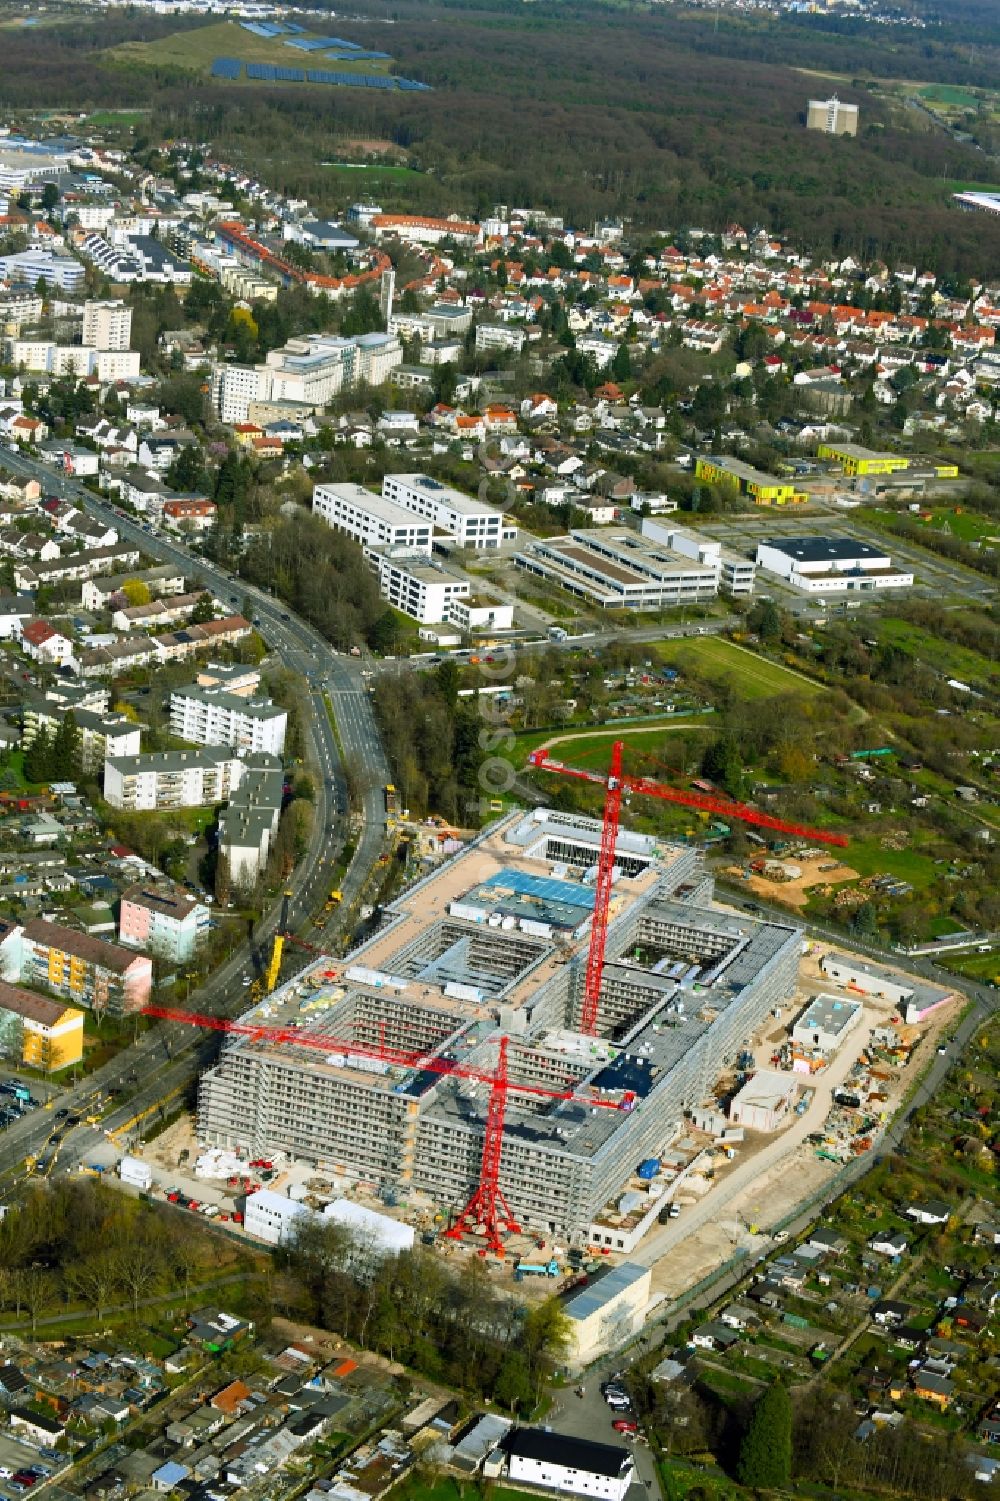 Offenbach am Main from the bird's eye view: Construction site for the new police building complex Polizeipraesidium Suedosthessen on Spessartring in Offenbach am Main in the state Hesse, Germany